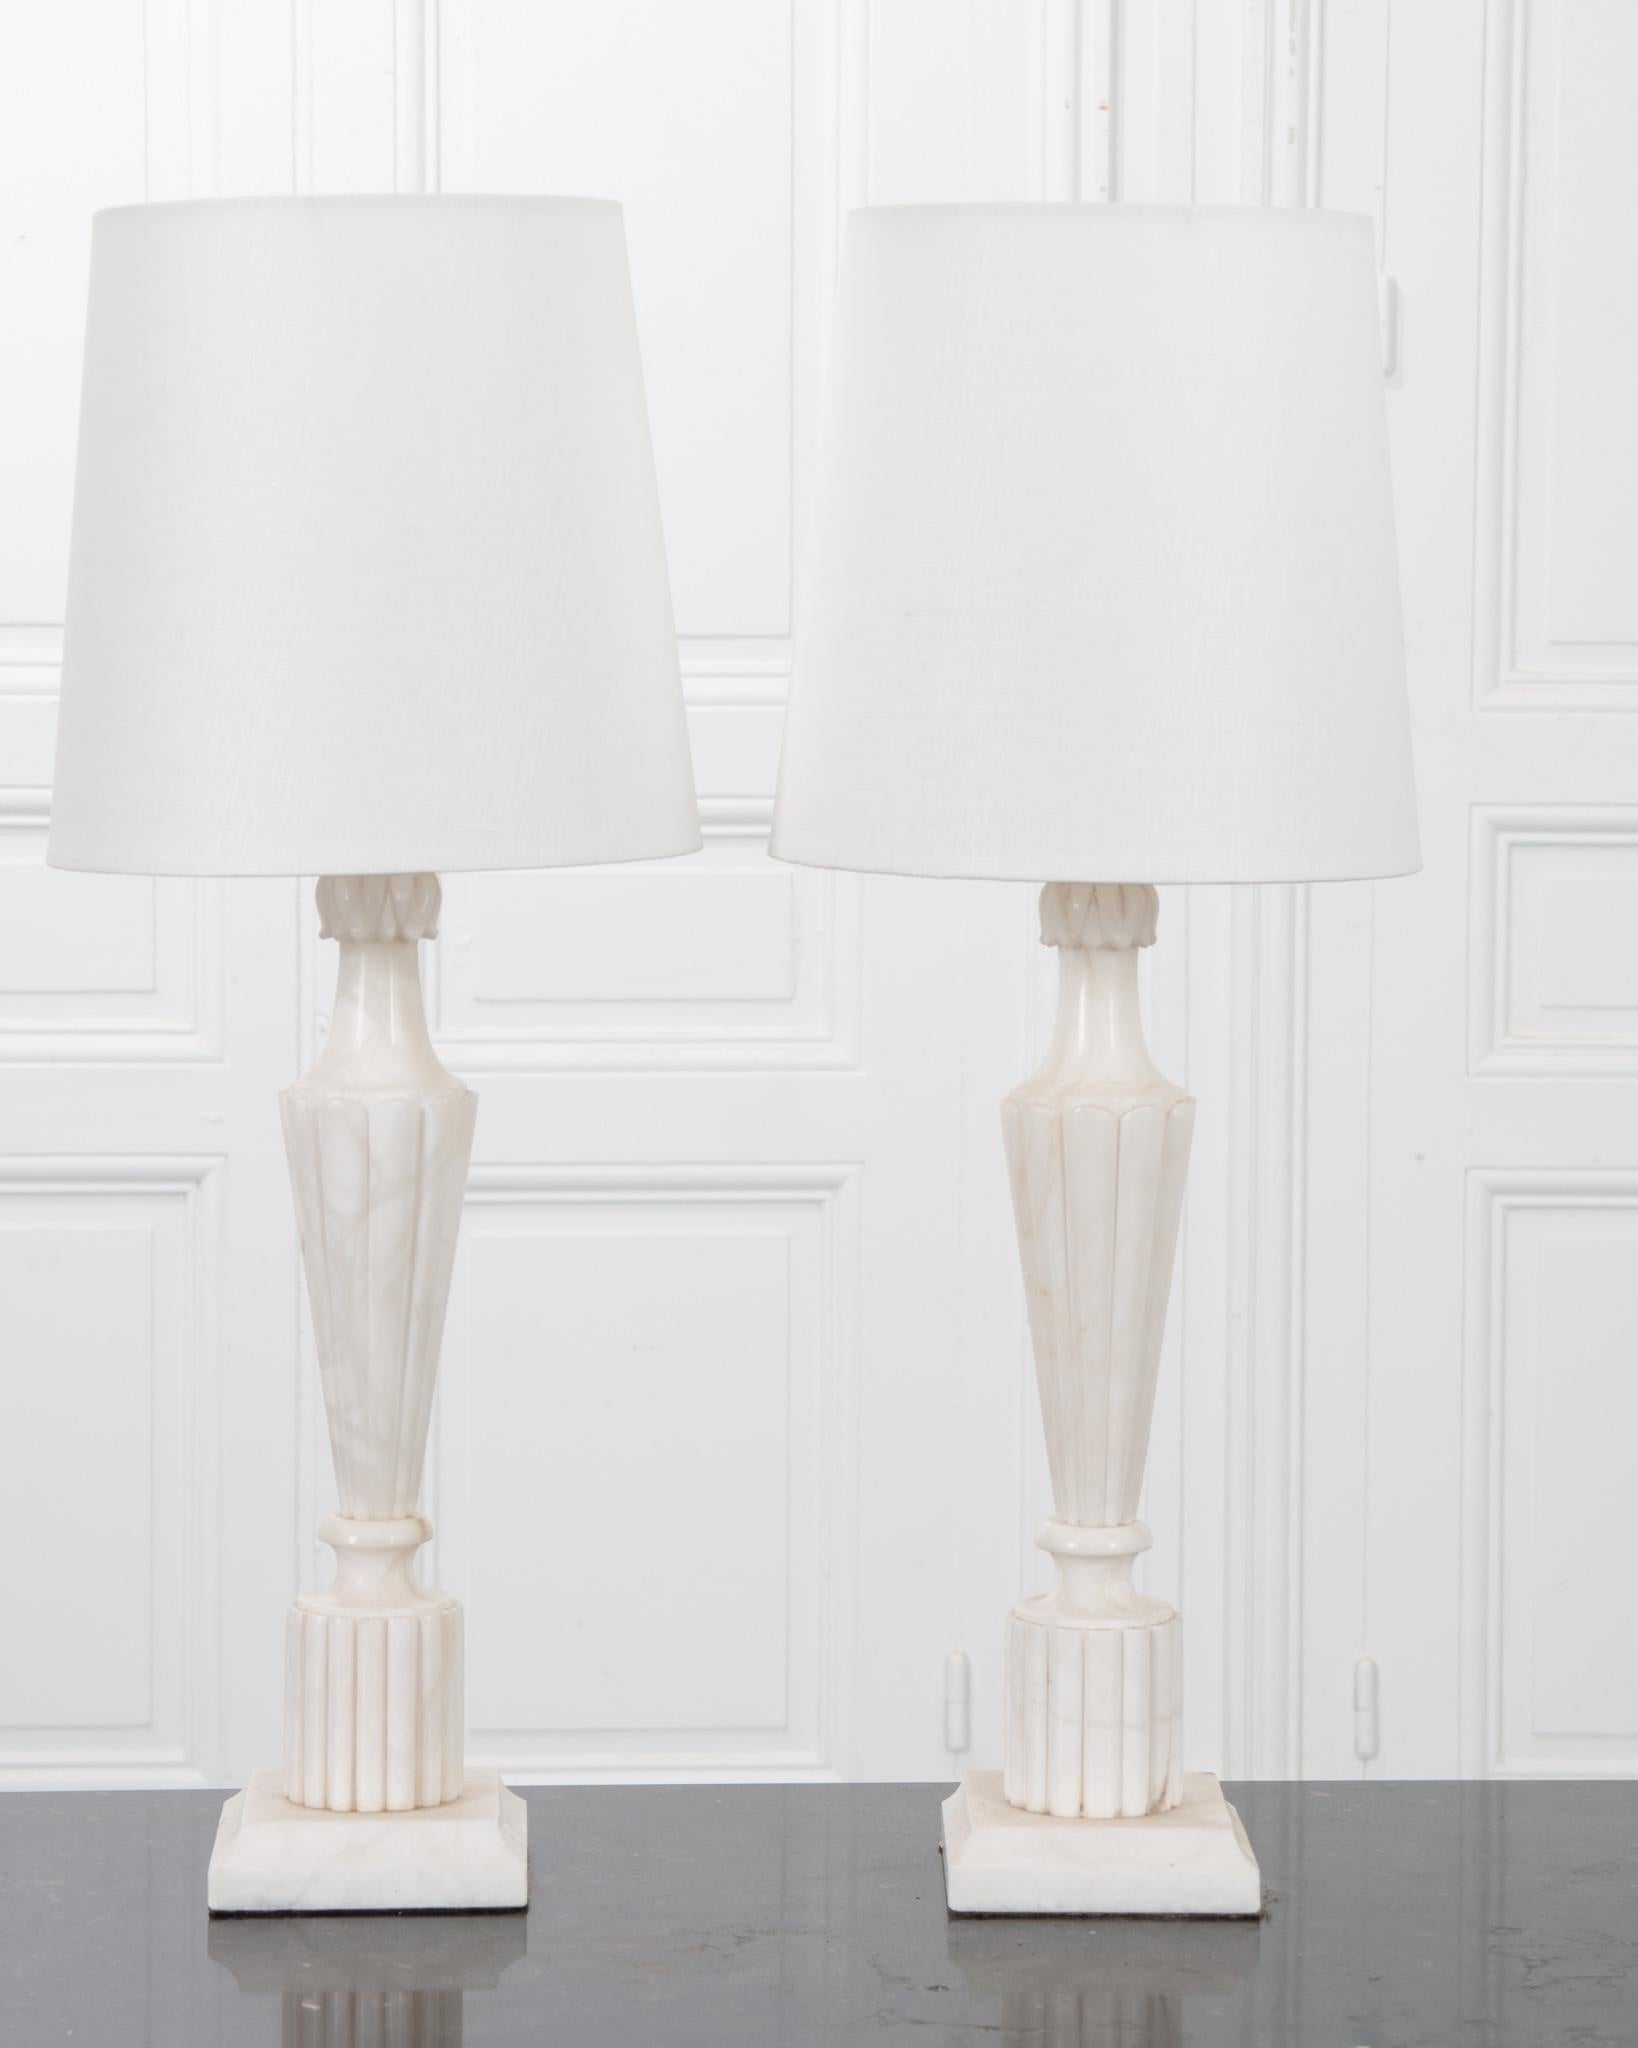 An elegant pair of vintage lamps from France! Carved from beautiful white marble with reeded details. The lamps come with fine custom white linen shades, measuring 10” diameter. Sleek and monochromatic, this pair of lamps will brighten up any space